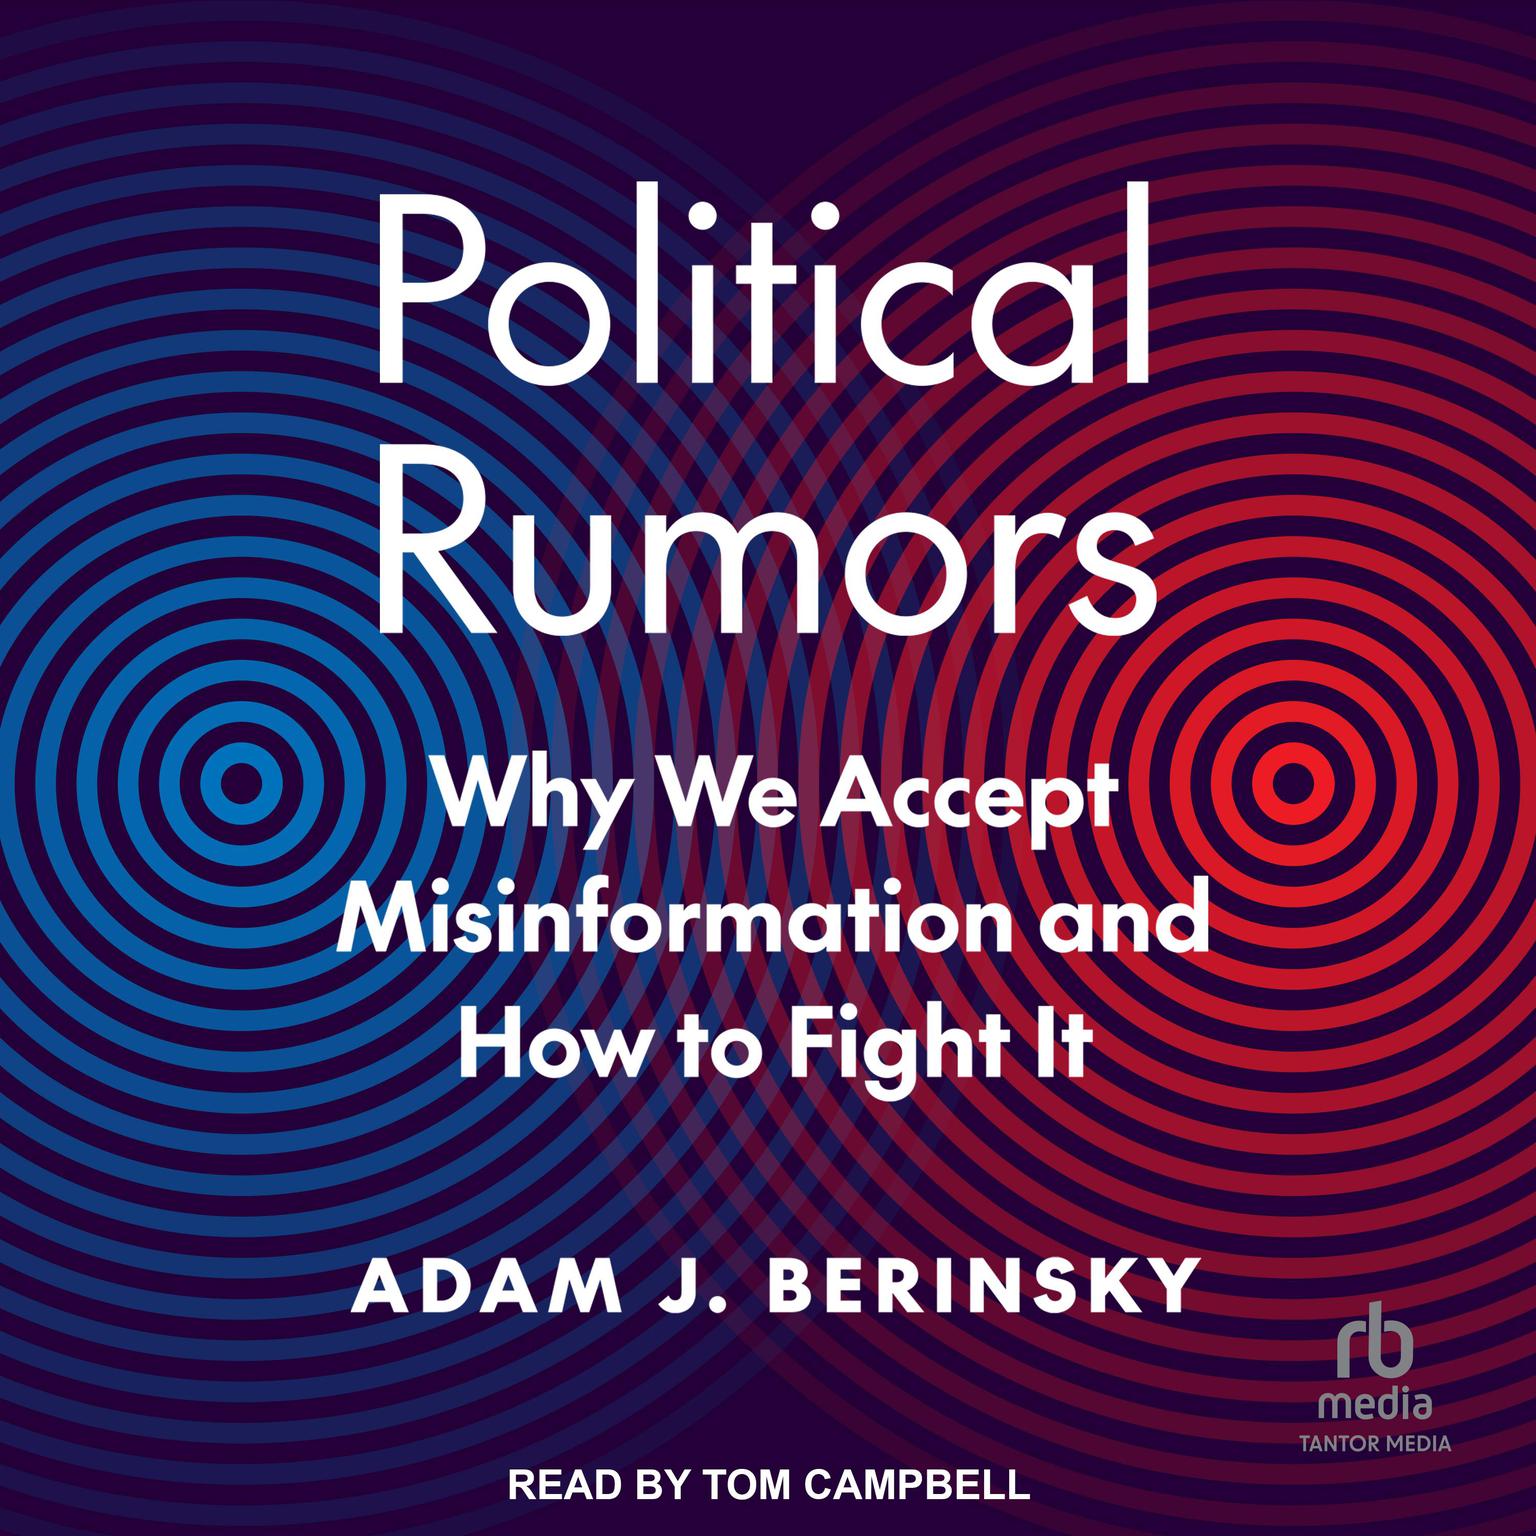 Political Rumors: Why We Accept Misinformation and How to Fight It Audiobook, by Adam J. Berinsky